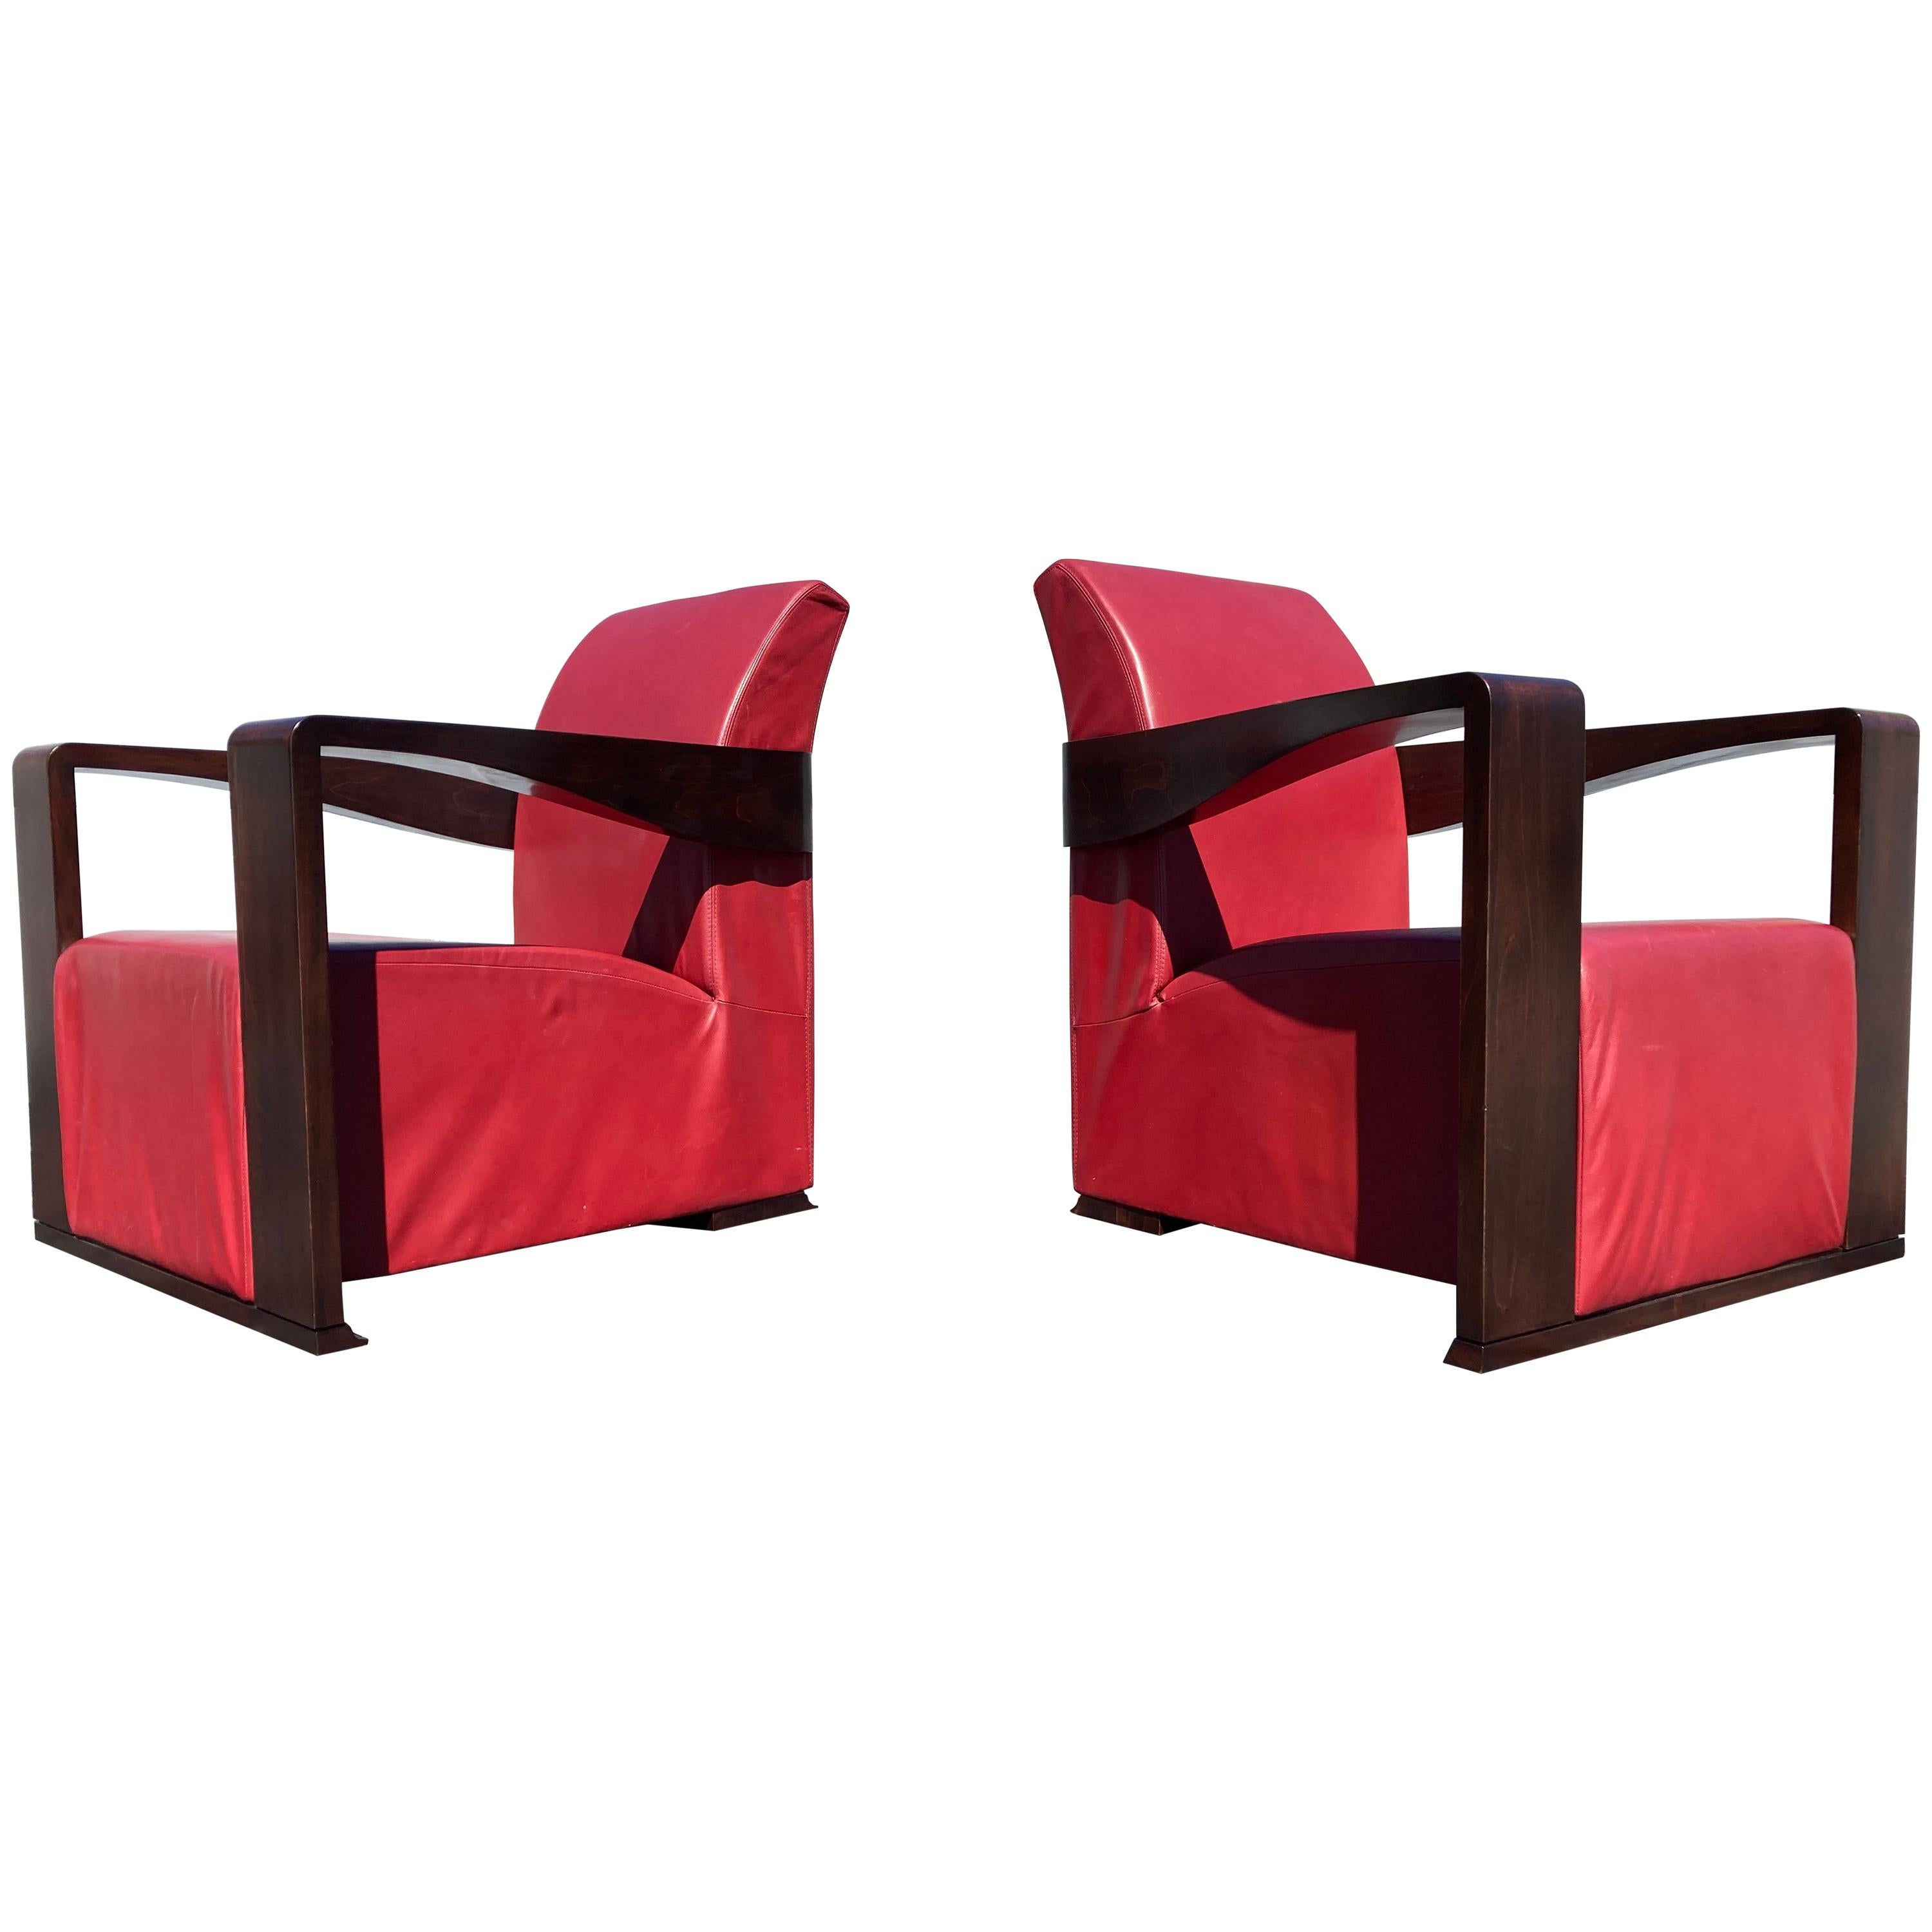 Art Deco Style Lounge Chairs, Red Leather For Sale